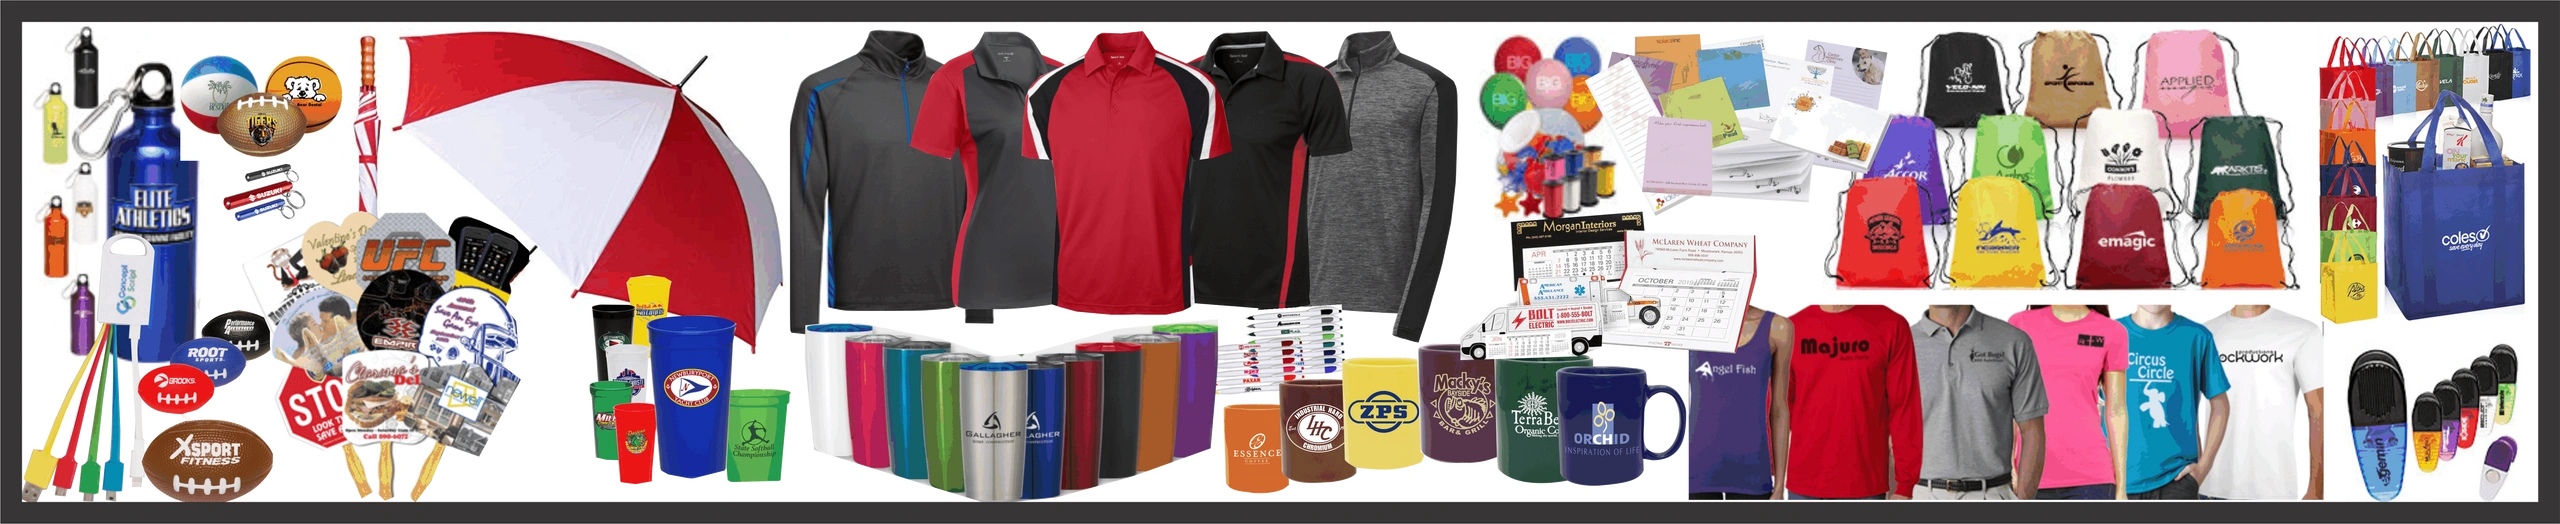 Over 600,000 Promotional Products Available.